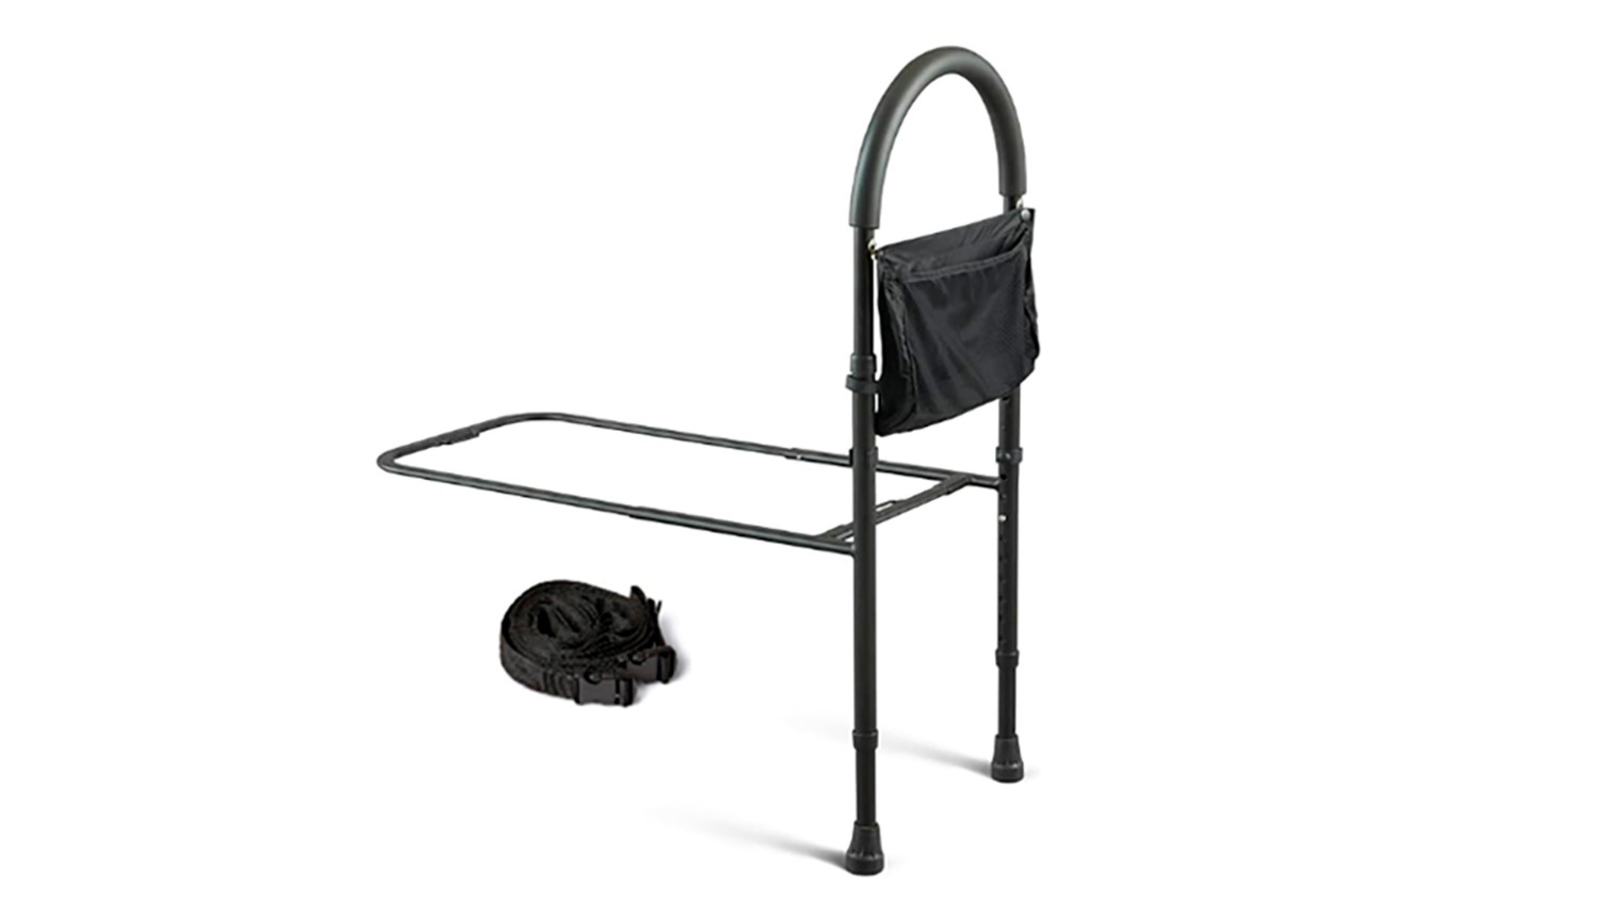 Medline recalls 1.5M portable adult bed rails following 2 reports of entrapment deaths [Video]